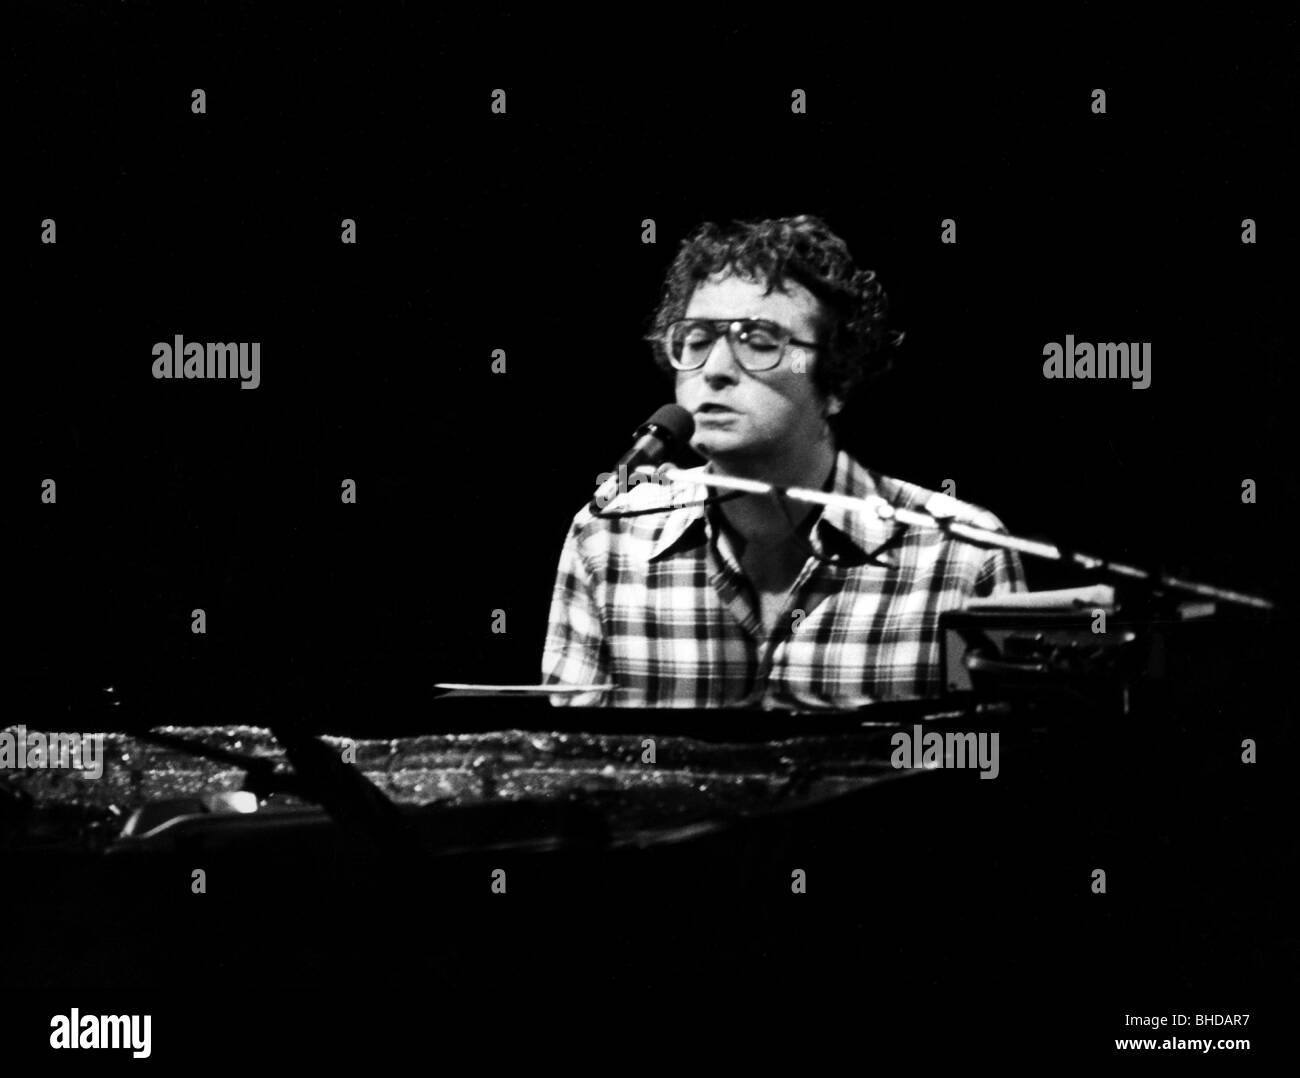 Newman, Randy, * 28.11.1943, US rock musician, at the piano, during a performance, circa late 1970s, Stock Photo